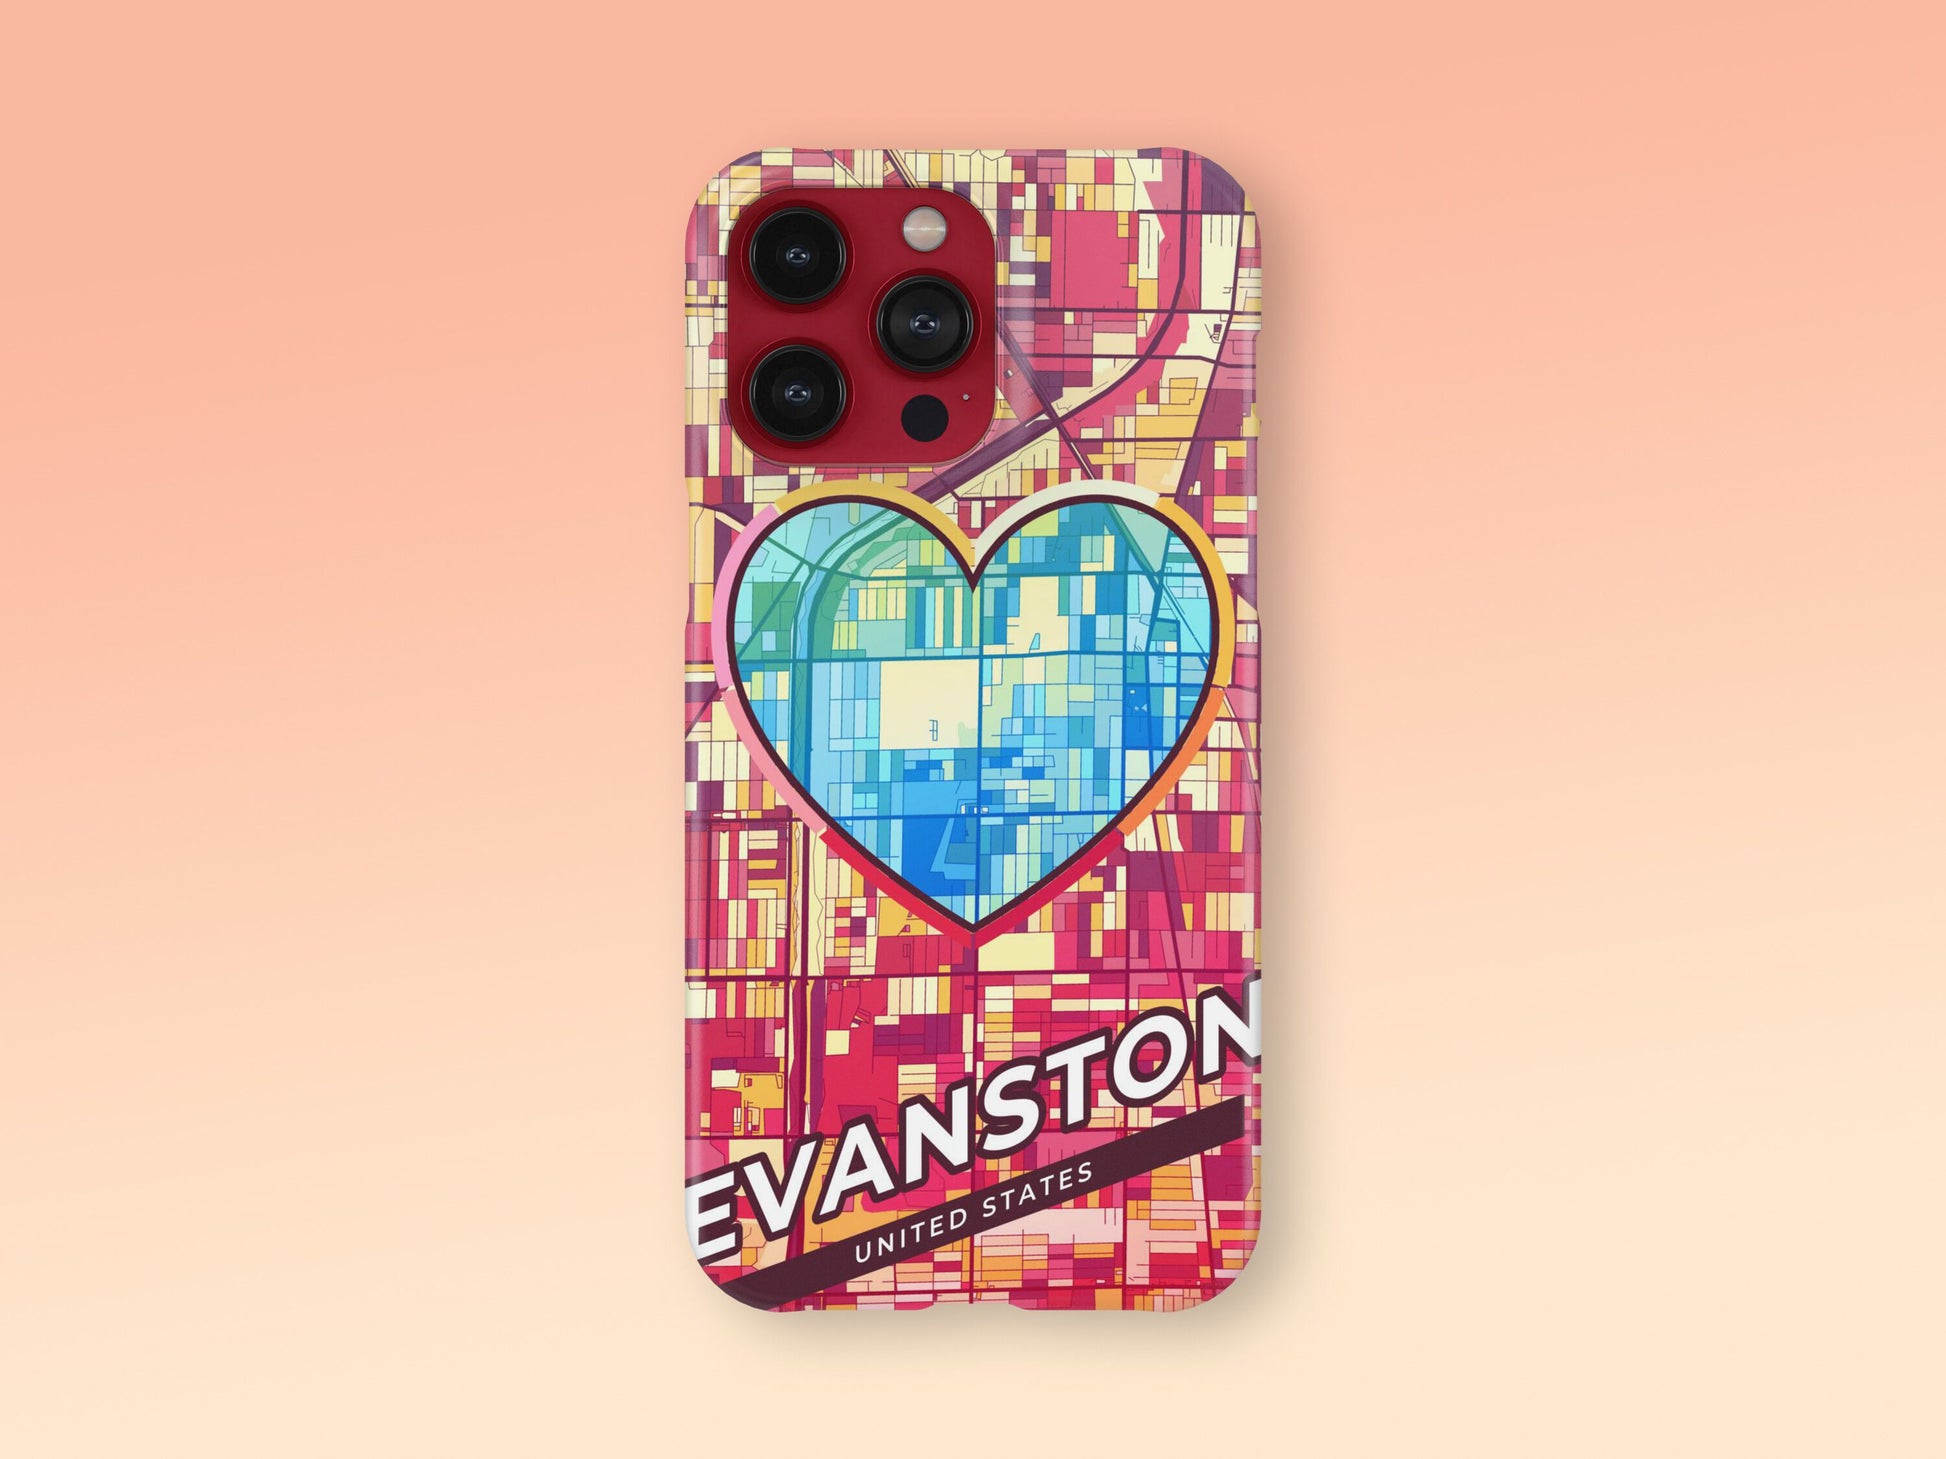 Evanston Illinois slim phone case with colorful icon. Birthday, wedding or housewarming gift. Couple match cases. 2